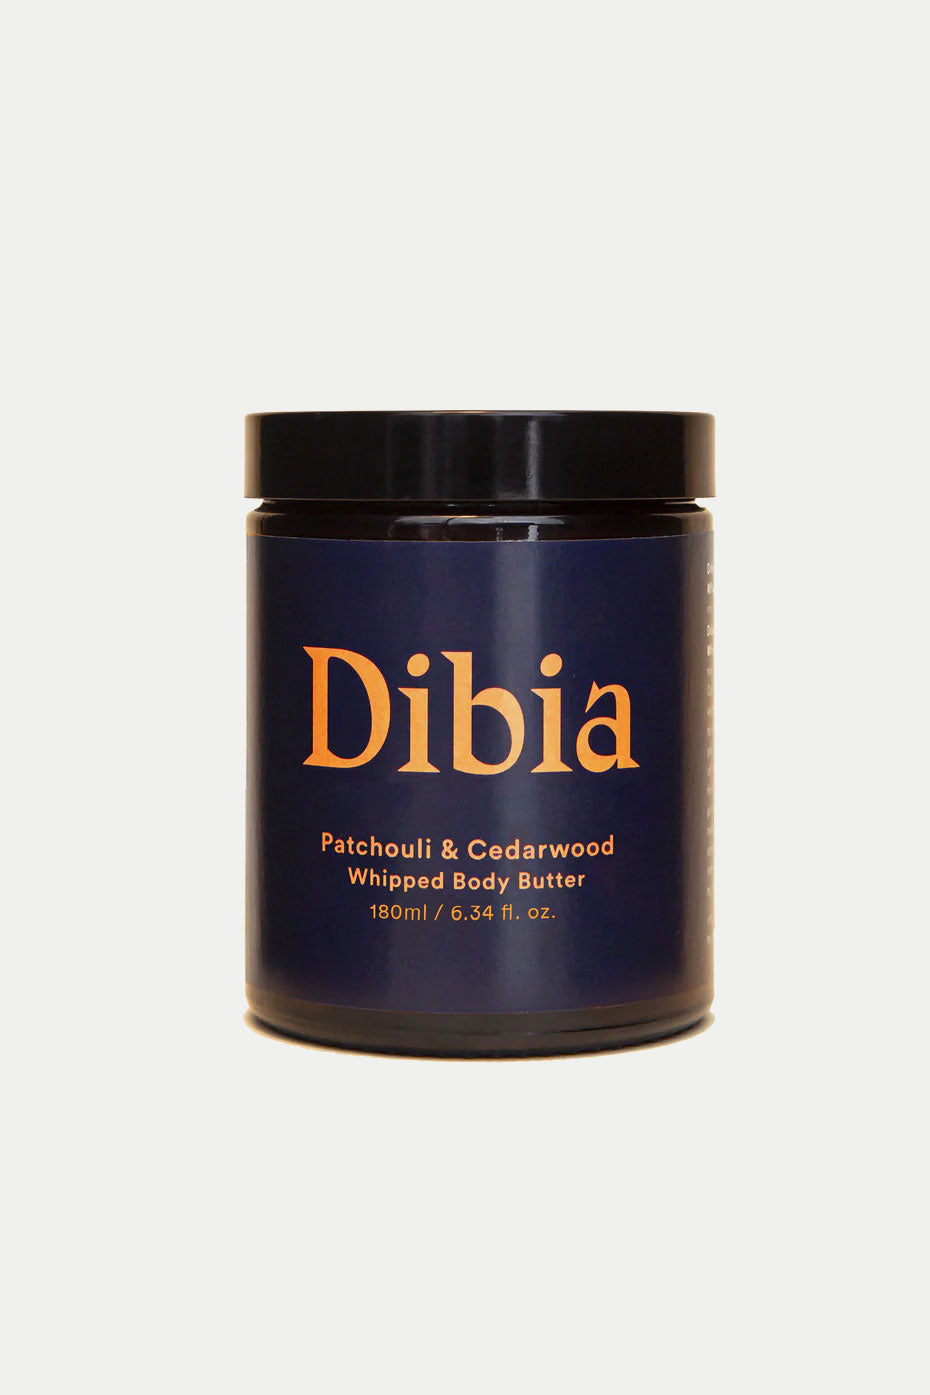 Dibia Patchouli & Cedarwood Whipped Body Butter 180ml